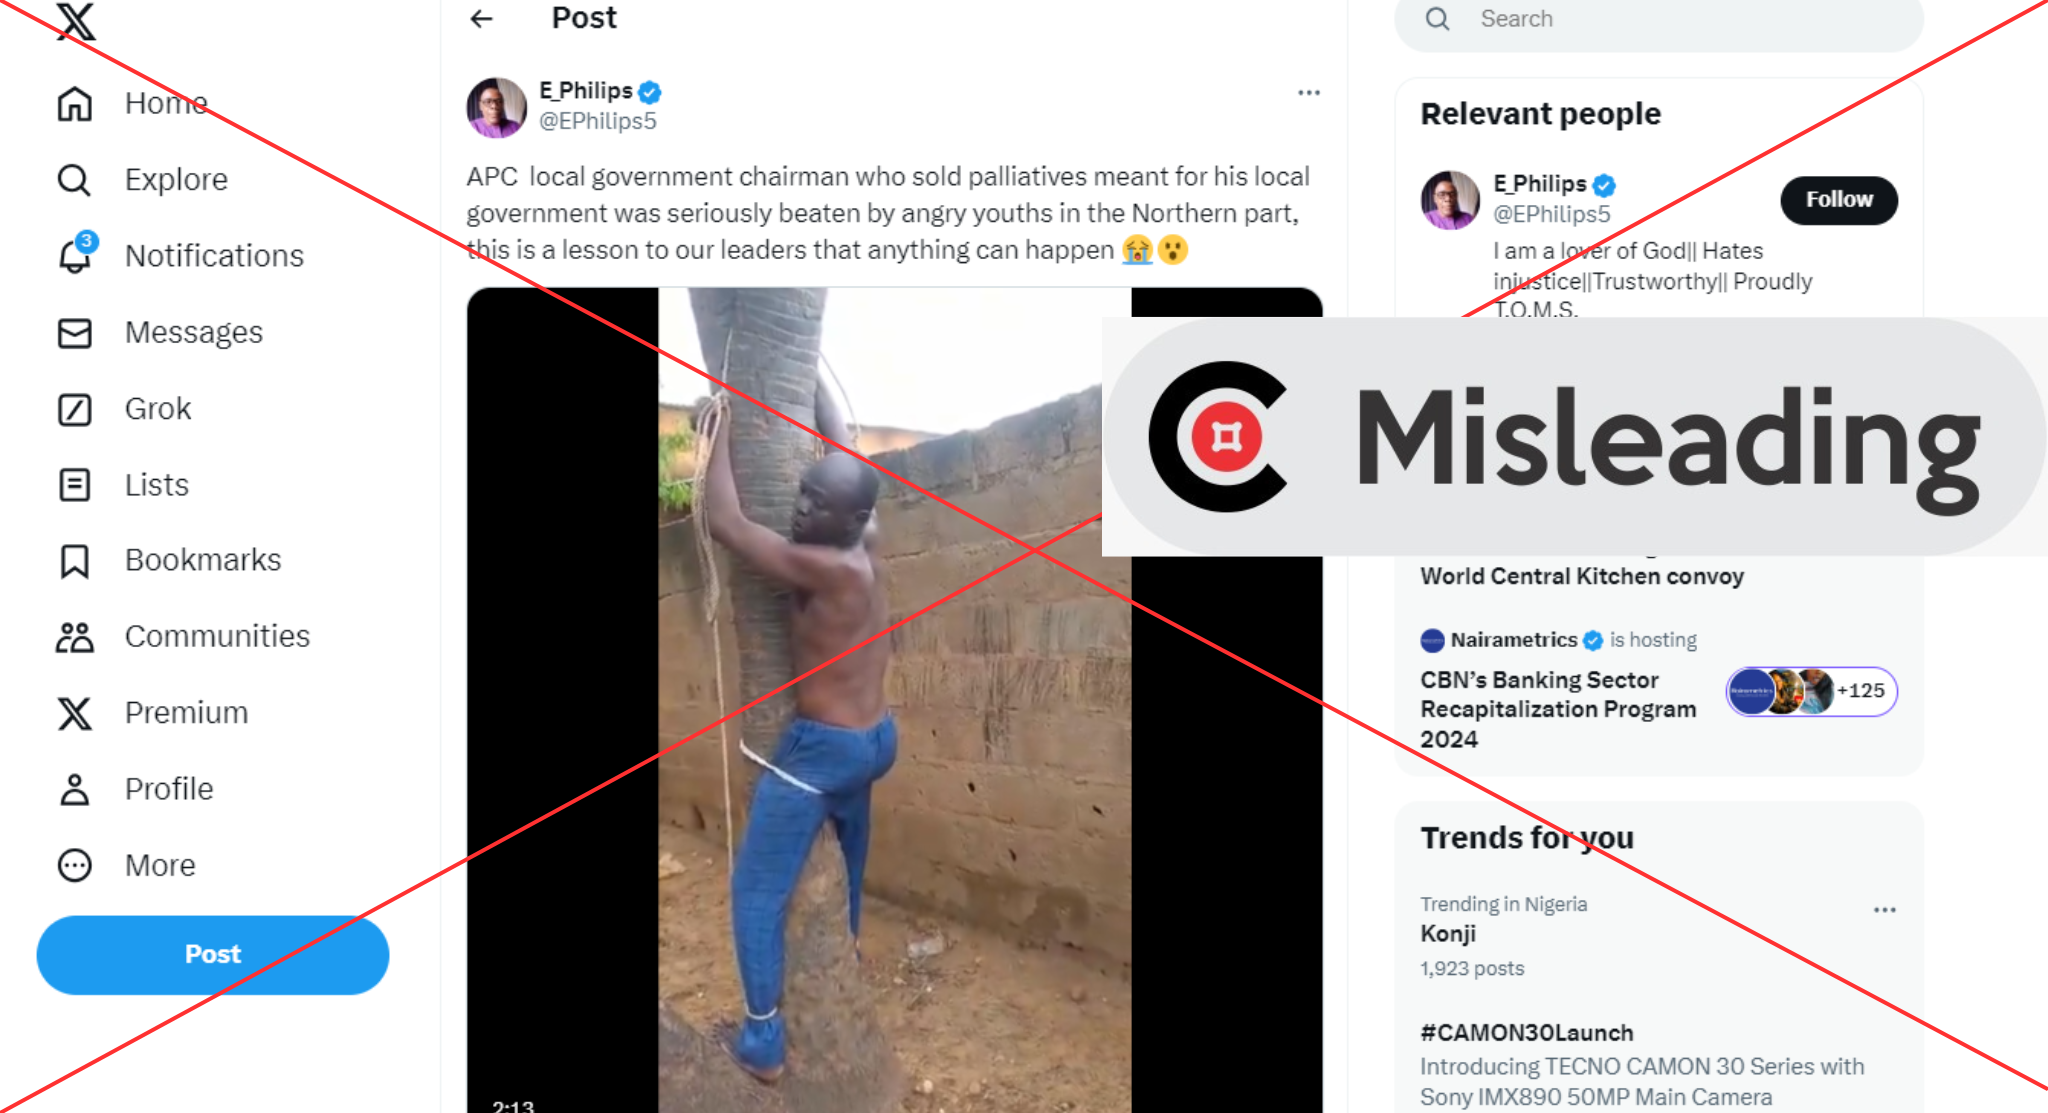 viral video purportedly showing a Nigerian politician being flogged/ The claim is MISLEADING